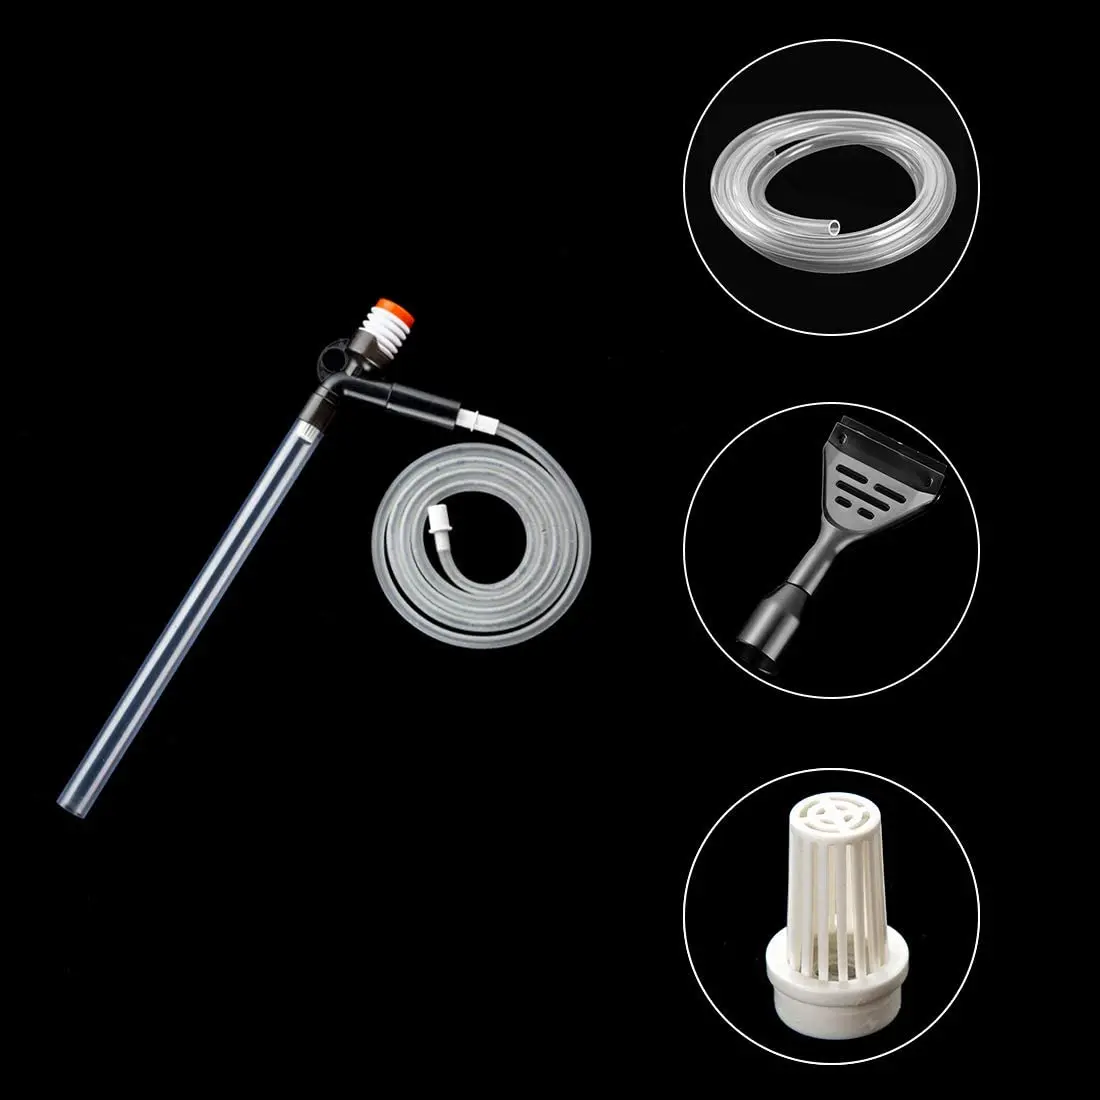 Aquarium Gravel Cleaner Fish Tank Kit Long Nozzle Water Changer for Water Changing and Filter Gravel Sand Cleaning with Air-Pressing Button and Adjustable Water Flow Controller 